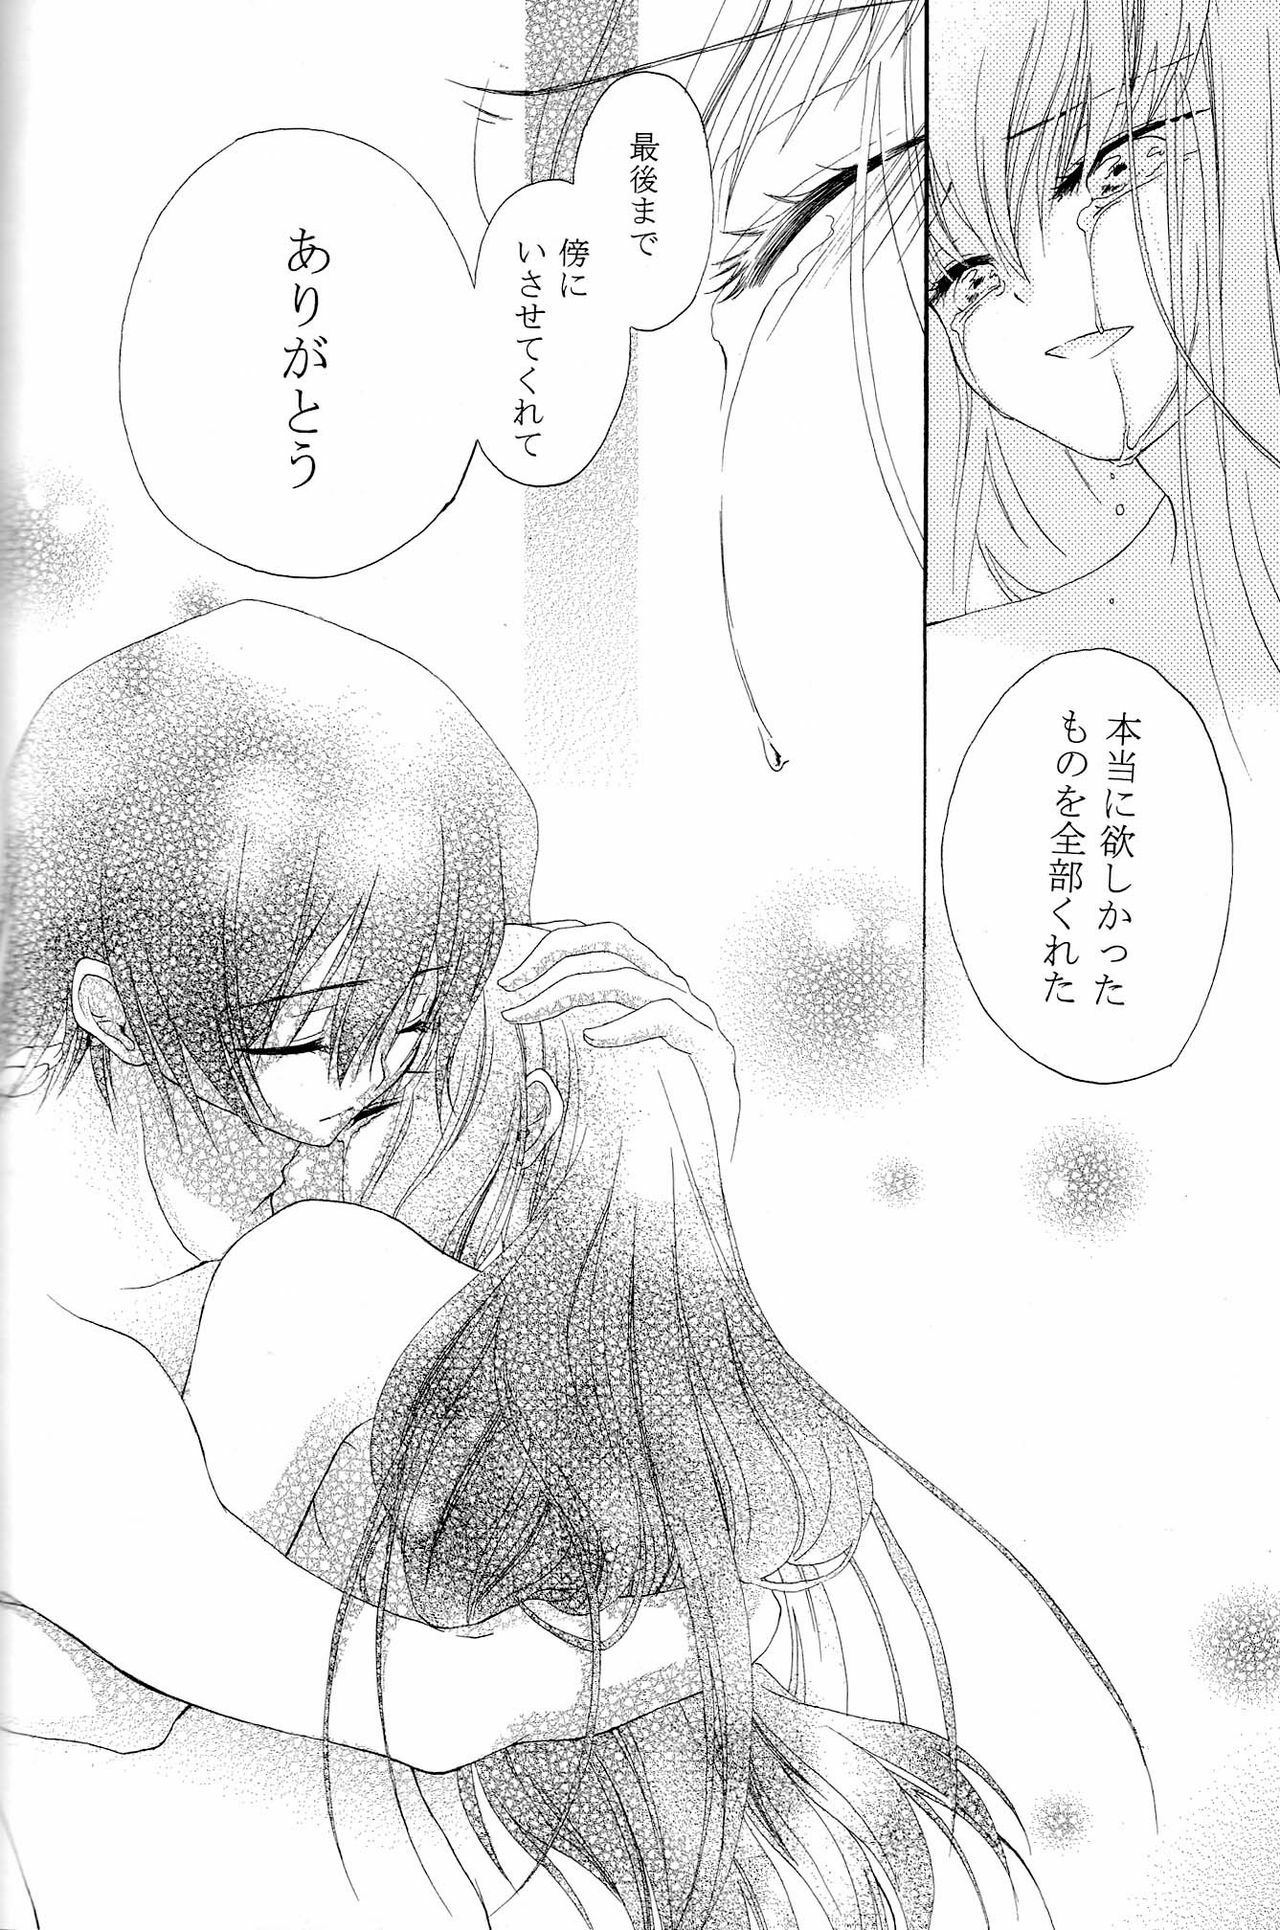 [APRICOT TEA] The last love letter presented to my dear only partner. (Code Geass) page 33 full